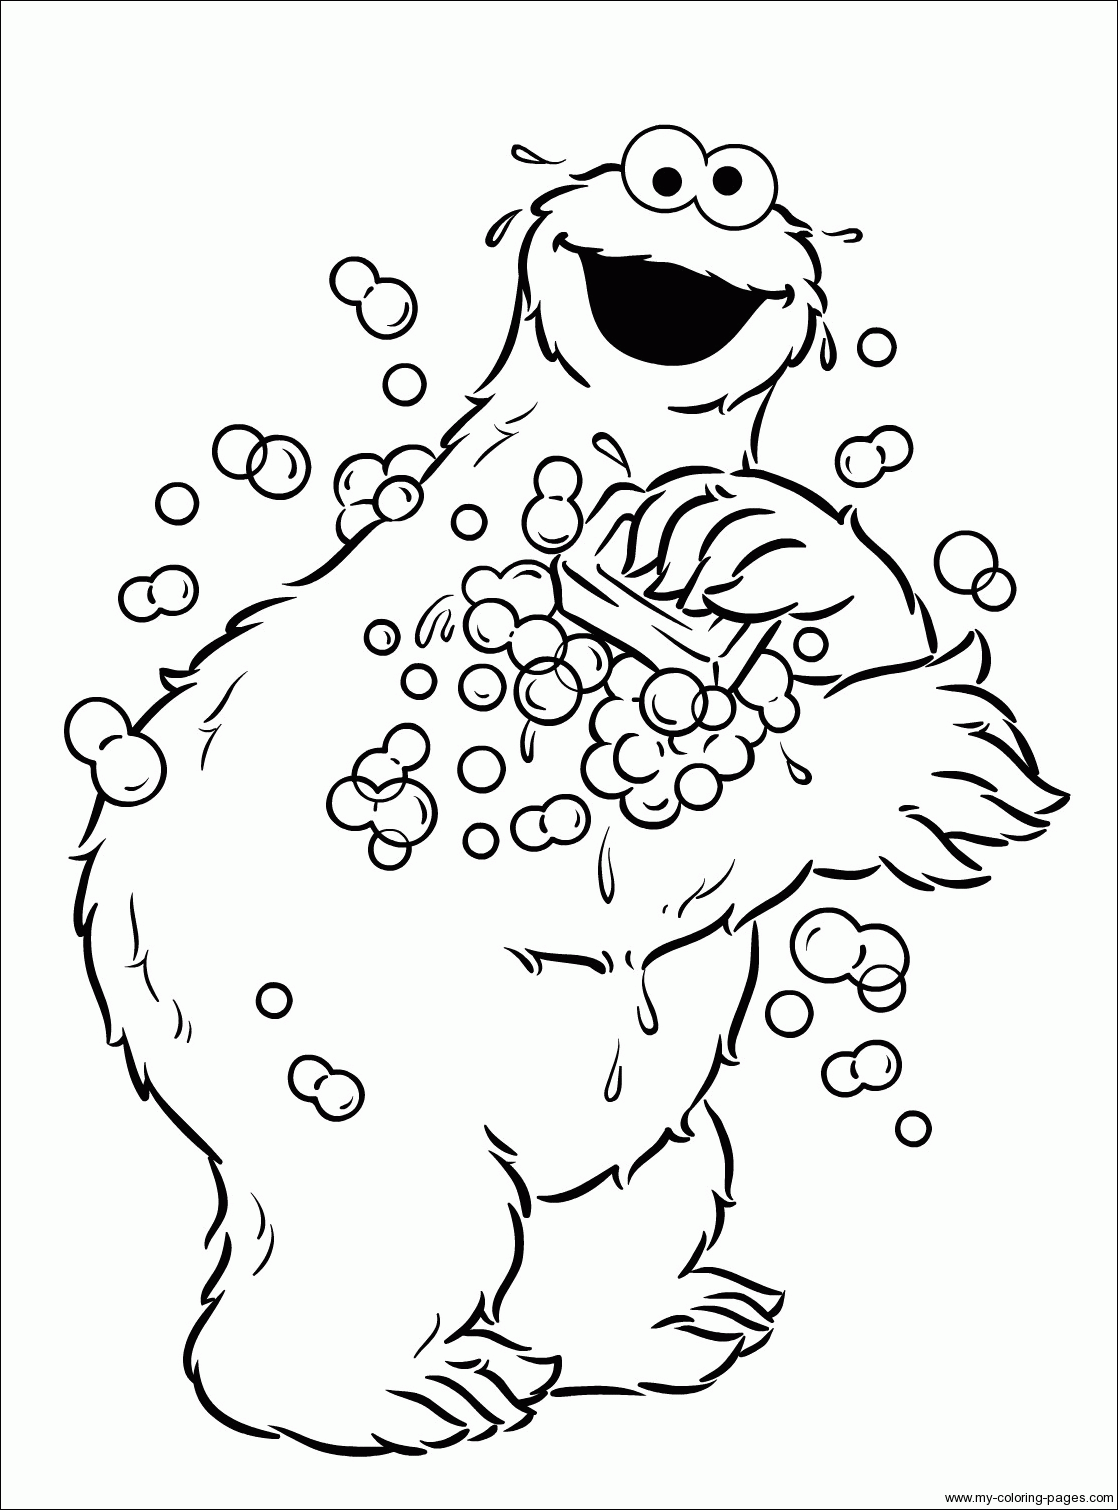 coloring-pages-printable-cookie-monster-coloring-page